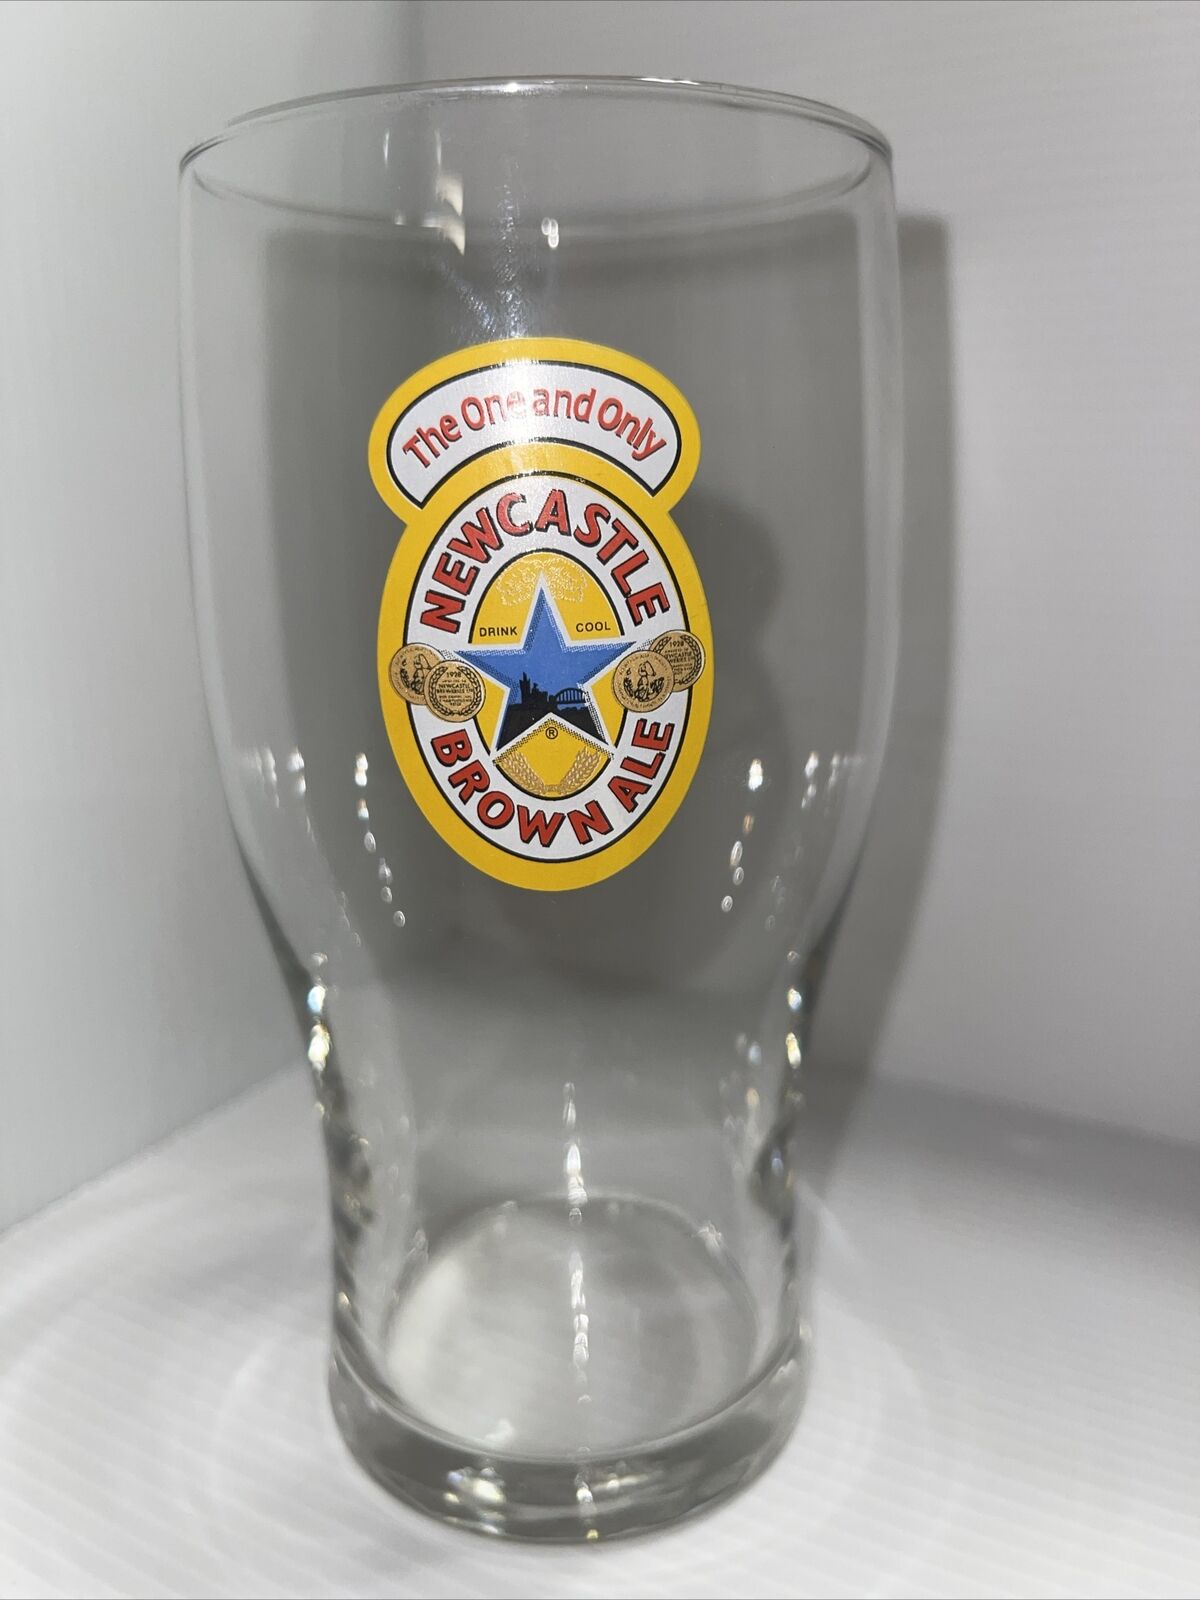 Vintage English Newcastle Brown Ale .5L Beer Glass - Circa 1990 The One And Only